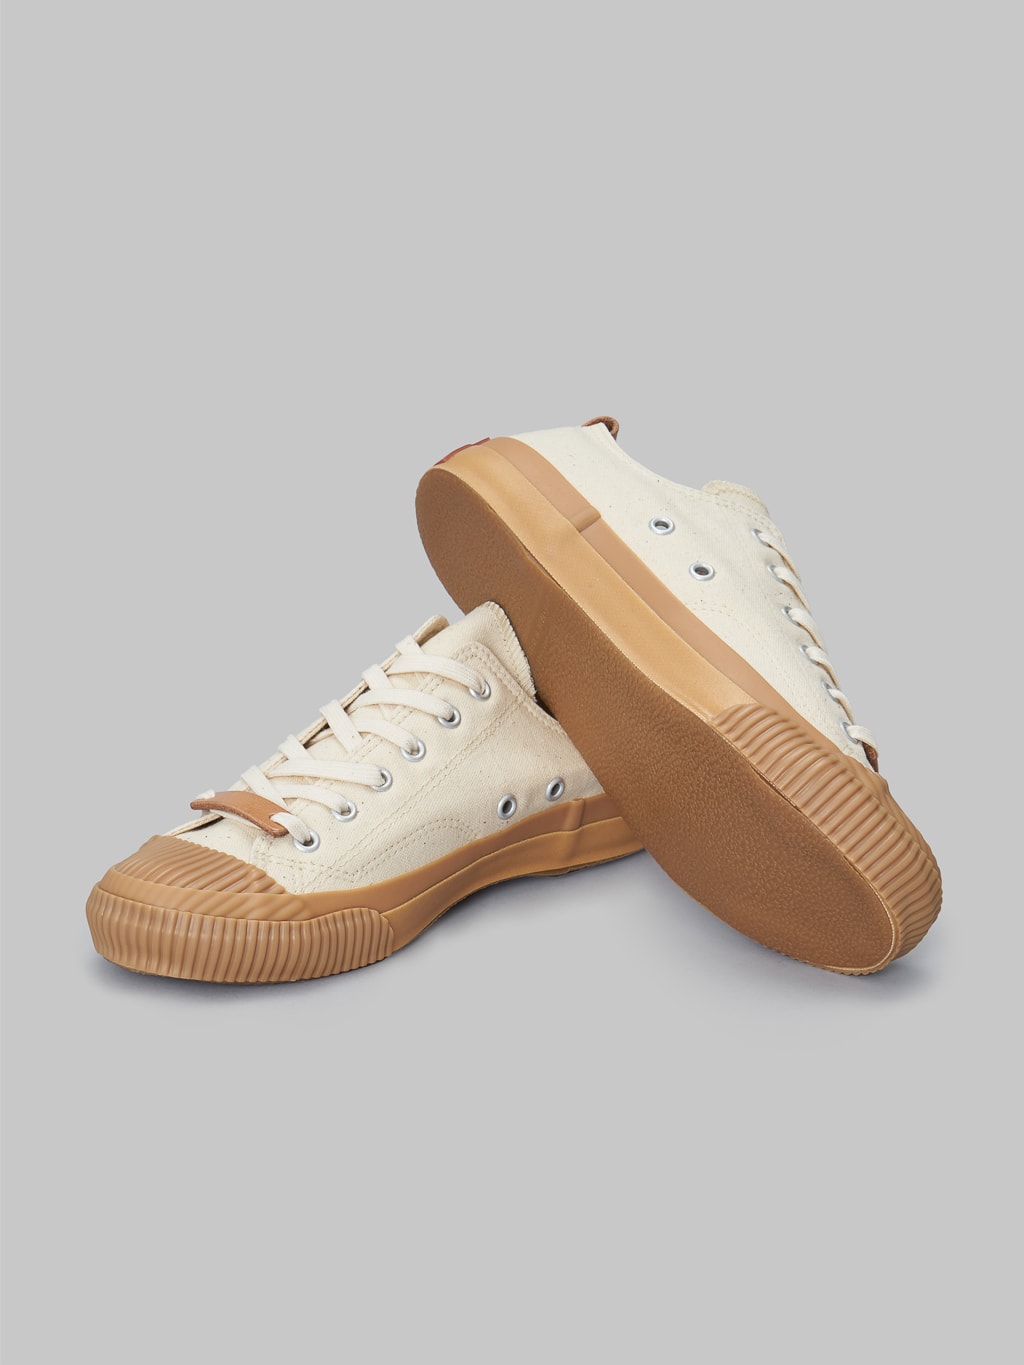 pras sellcap low leather pull strap kinari gum sneakers rubber sole